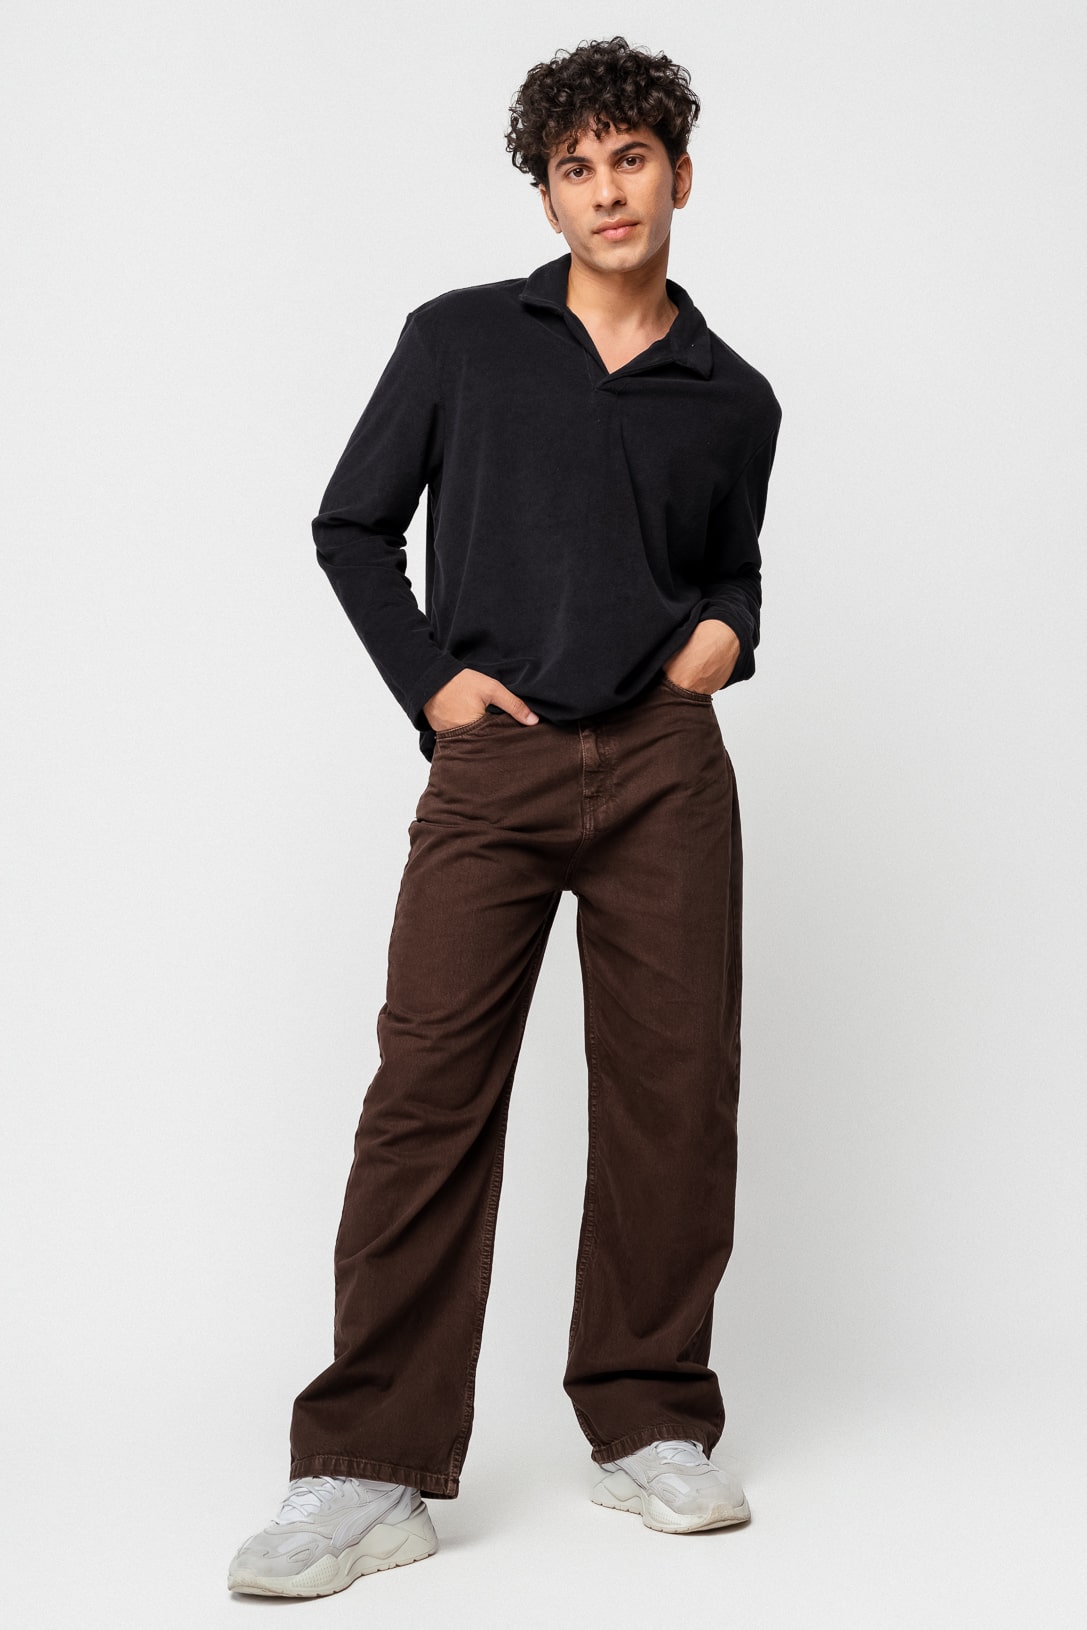 Todd' Flat Front Luxury 120's Wool Serge Pant in Chocolate Brown by Zanella  - Hansen's Clothing